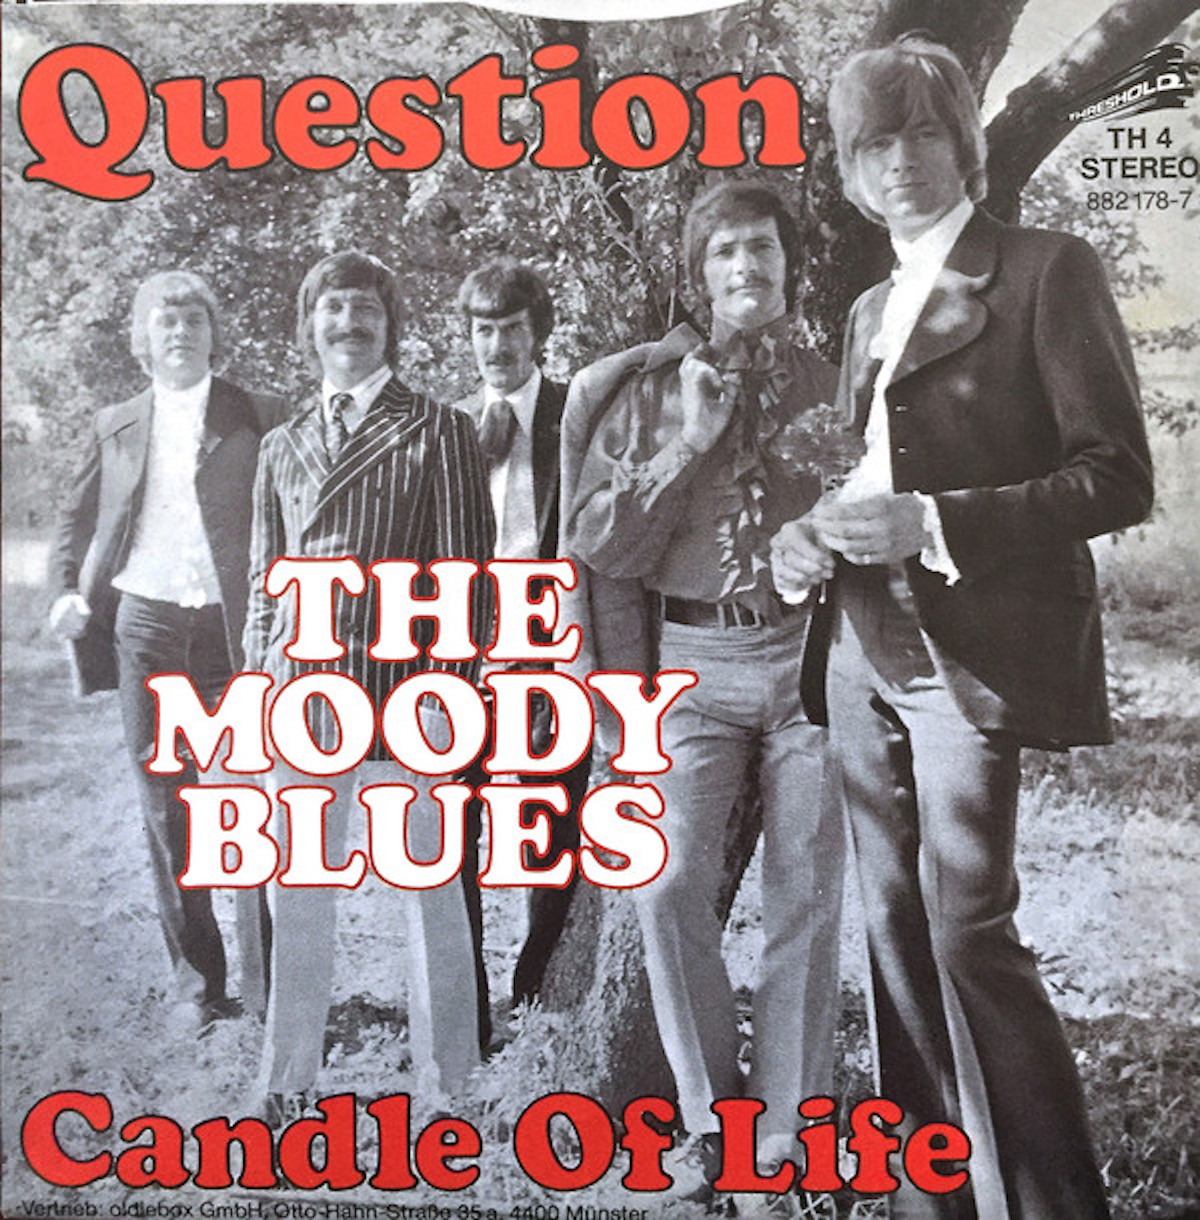 album cover for the moody blues "question"